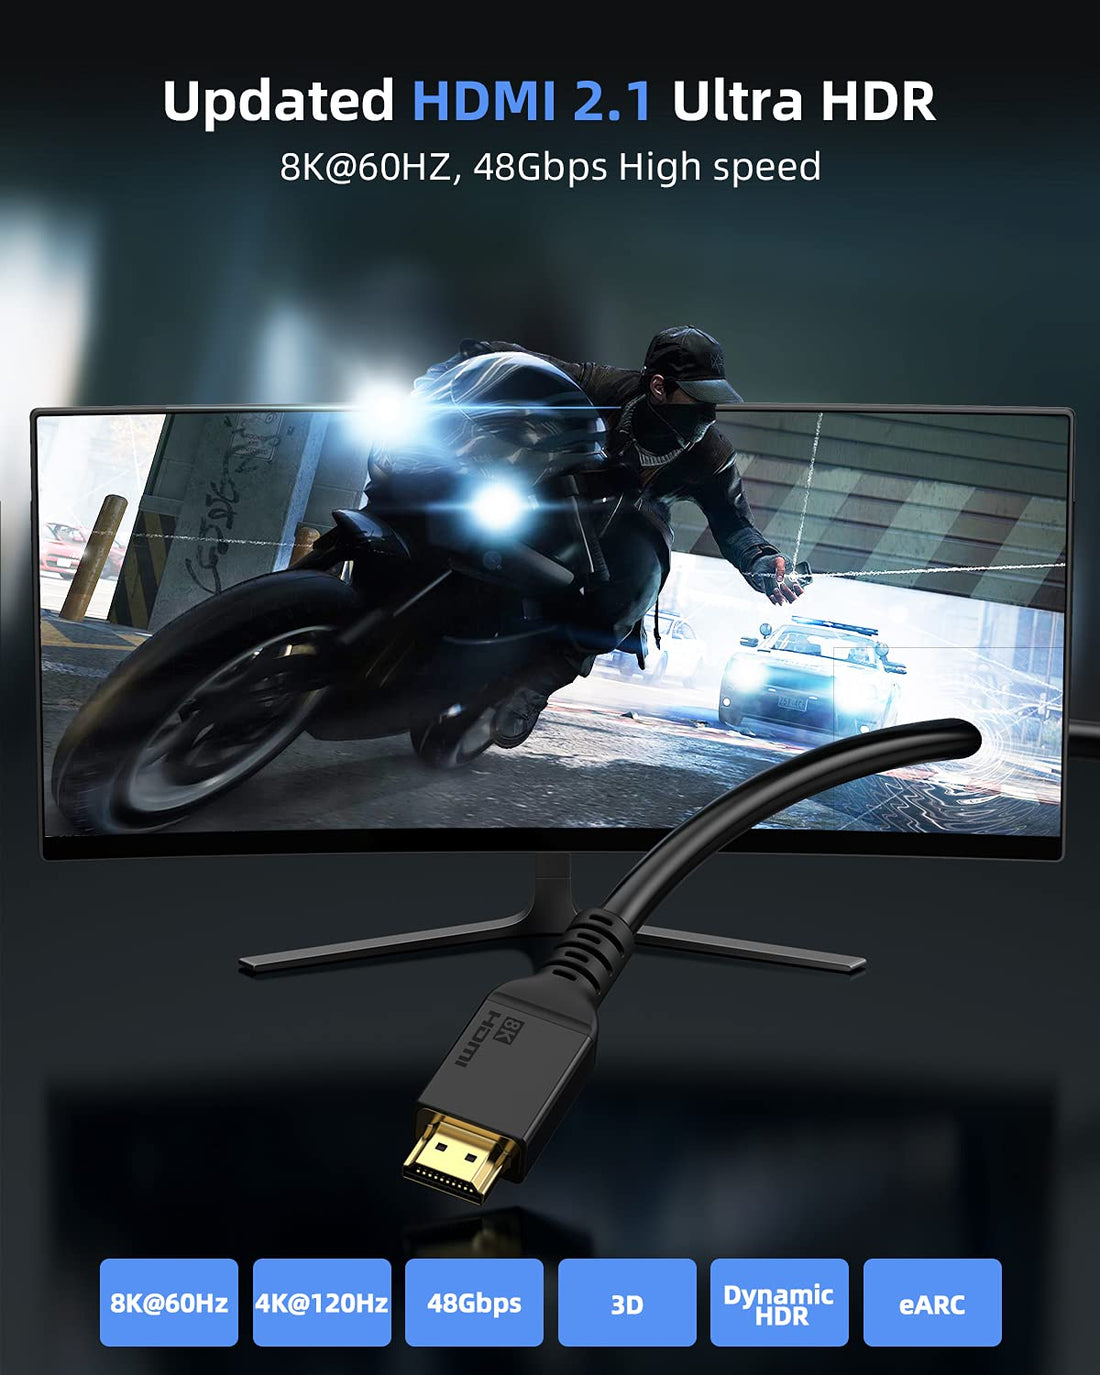 8K HDMI Cable 48Gbps 23FT/25ft, Maxonar (Certified) Ultra High Speed Long HDMI 2.1 Cord CL3 in Wall Rated, 4K@120Hz 8K@60Hz Compatible with Dolby Vision Roku Sony LG Samsung PS5 Xbox Series X